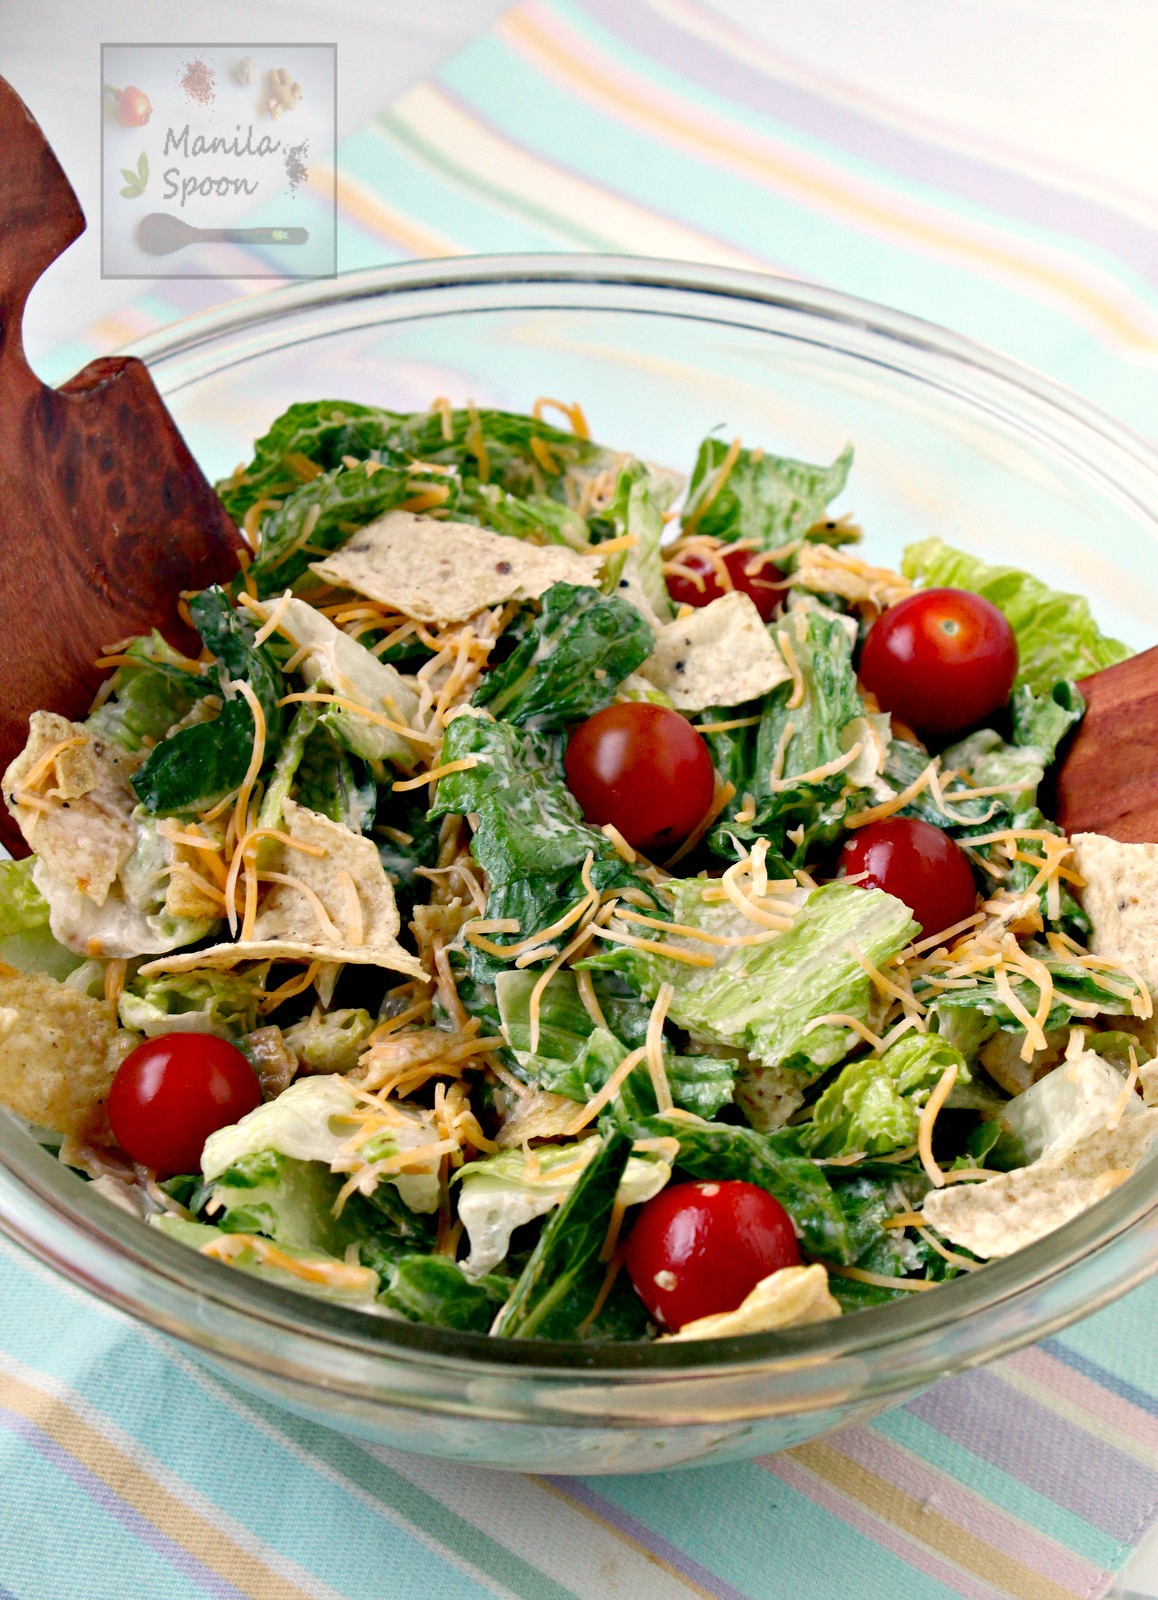 Crunchy tortillas and cumin-flavored dressing give this southwestern-style salad its delicious flavor! With few ingredients and just 5 minutes to make - it's a winner every time! | manilaspoon.com